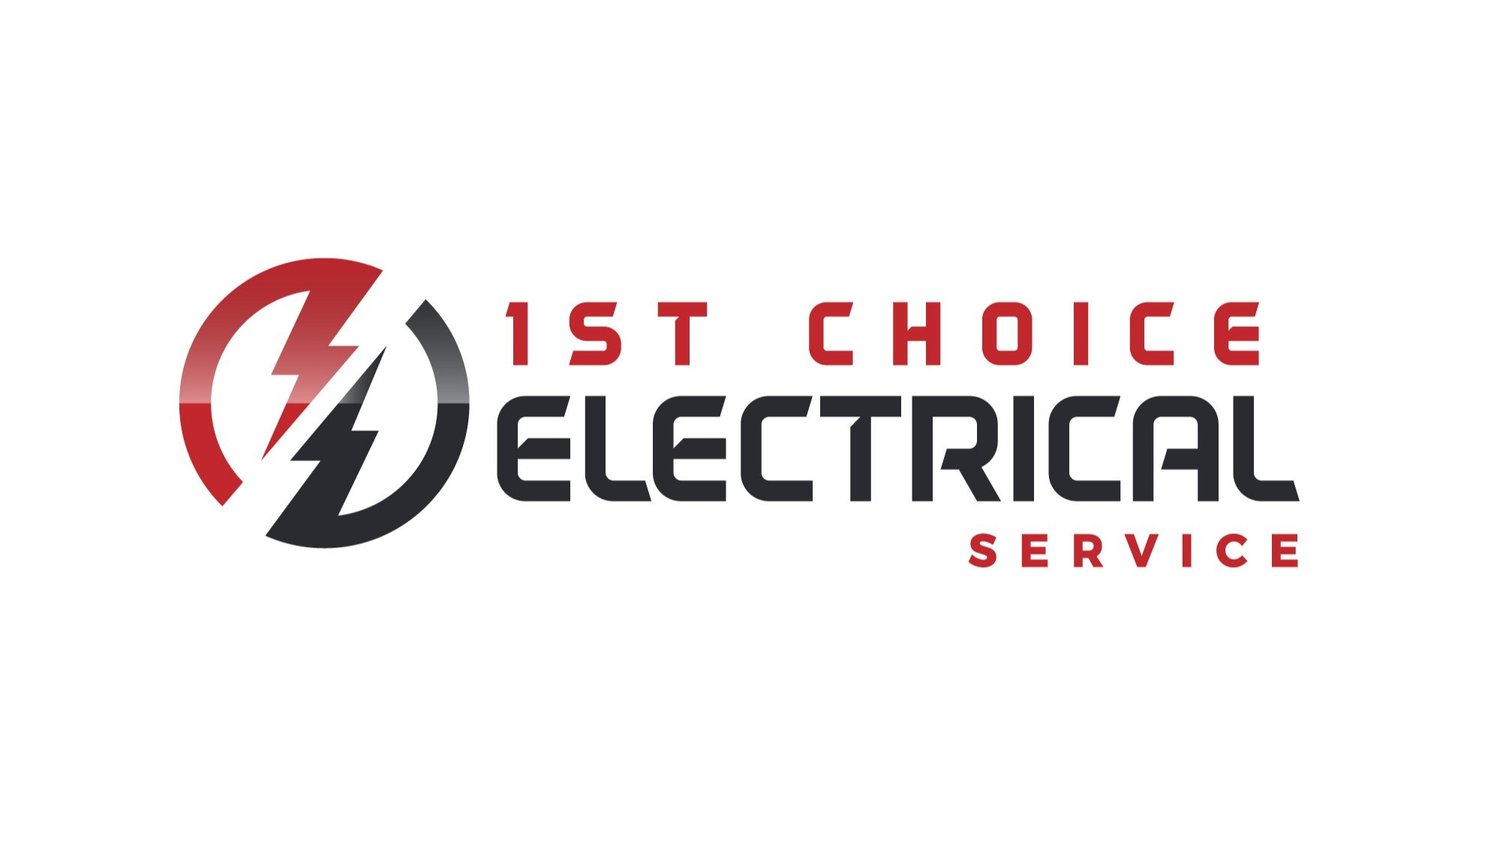 1st Choice Electrical Service